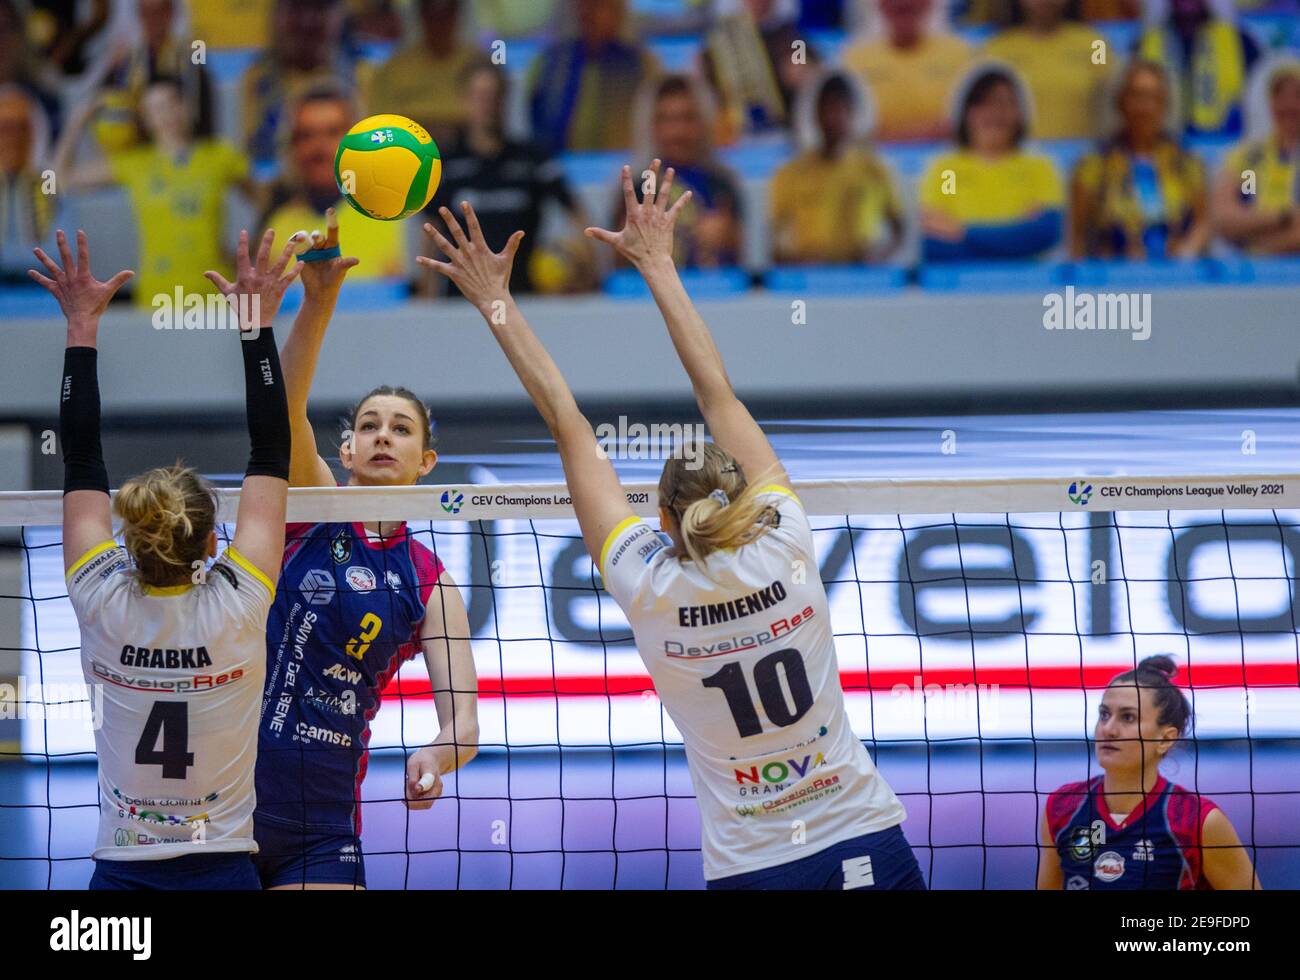 Schwerin, Germany. 04th Feb, 2021. Volleyball, Women: Champions League,  DevelopRes Rzeszów - SDB Scandicci, 4th round, Group A, Matchday 4:  Magdalena Stysiak (M) of SDB Scandicci (Italy) prevails at the net against